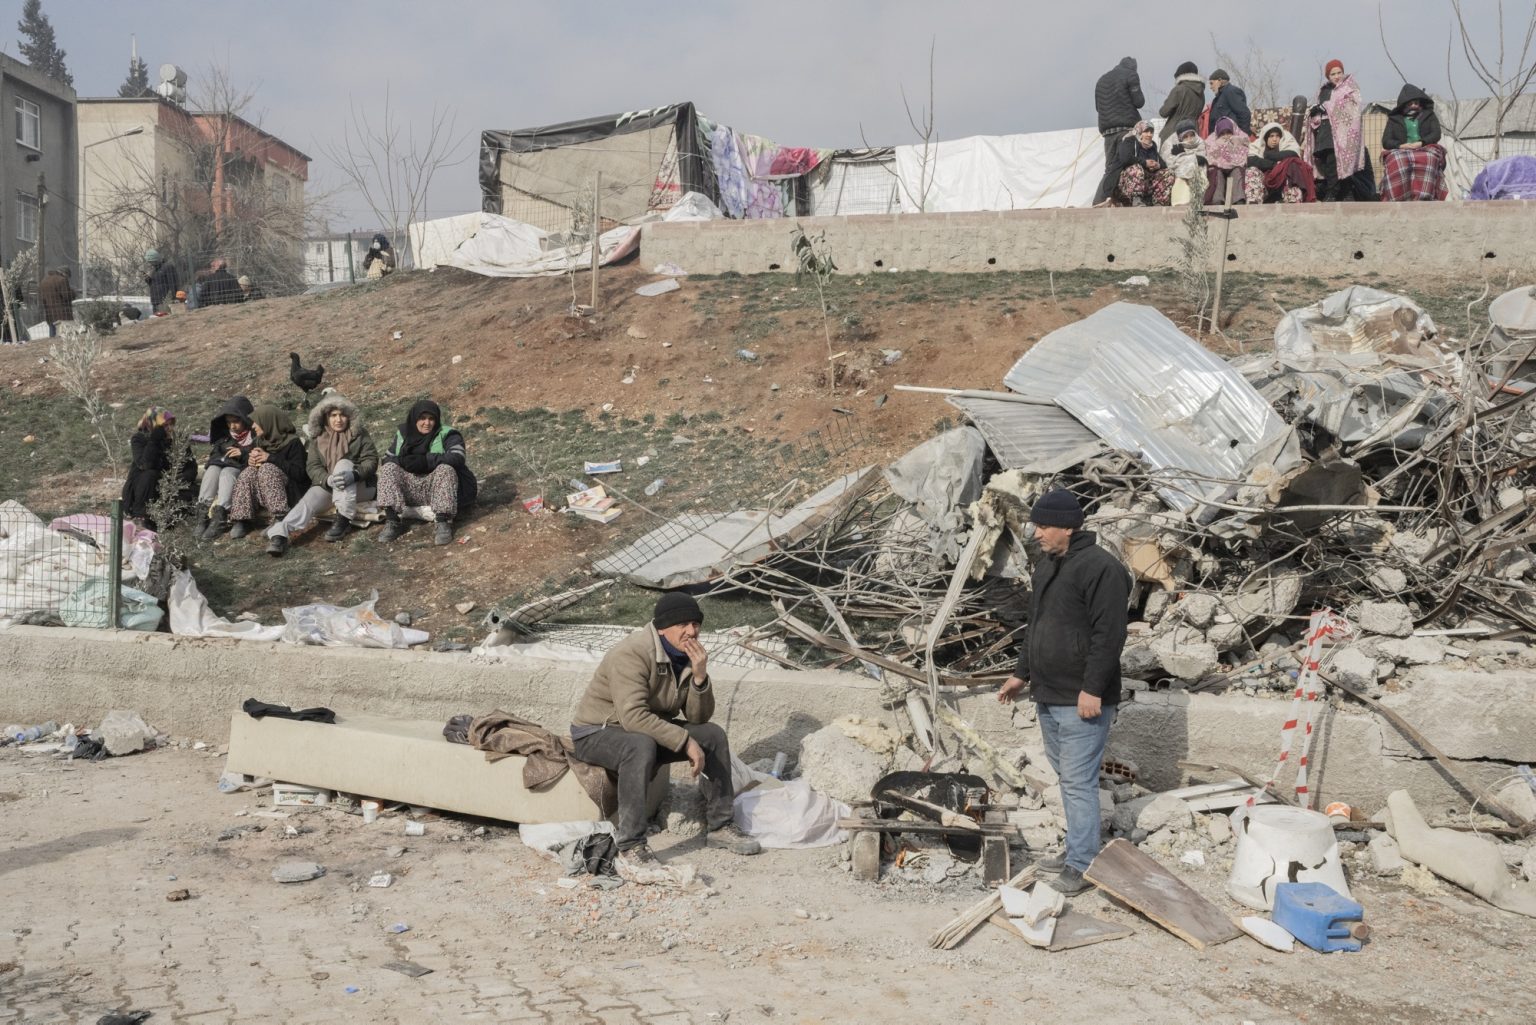 Kahramanmaras¸, Turkey, February 2023 - The aftermath of the earthquake that hit southern Turkey and northern Syria.     Civilians sit in front of a damaged area of the city.><
Kahramanmaras¸, Turchia, febbraio 2023  Le conseguenze del terremoto che ha colpito la Turchia del Sud e la Siria del nord.